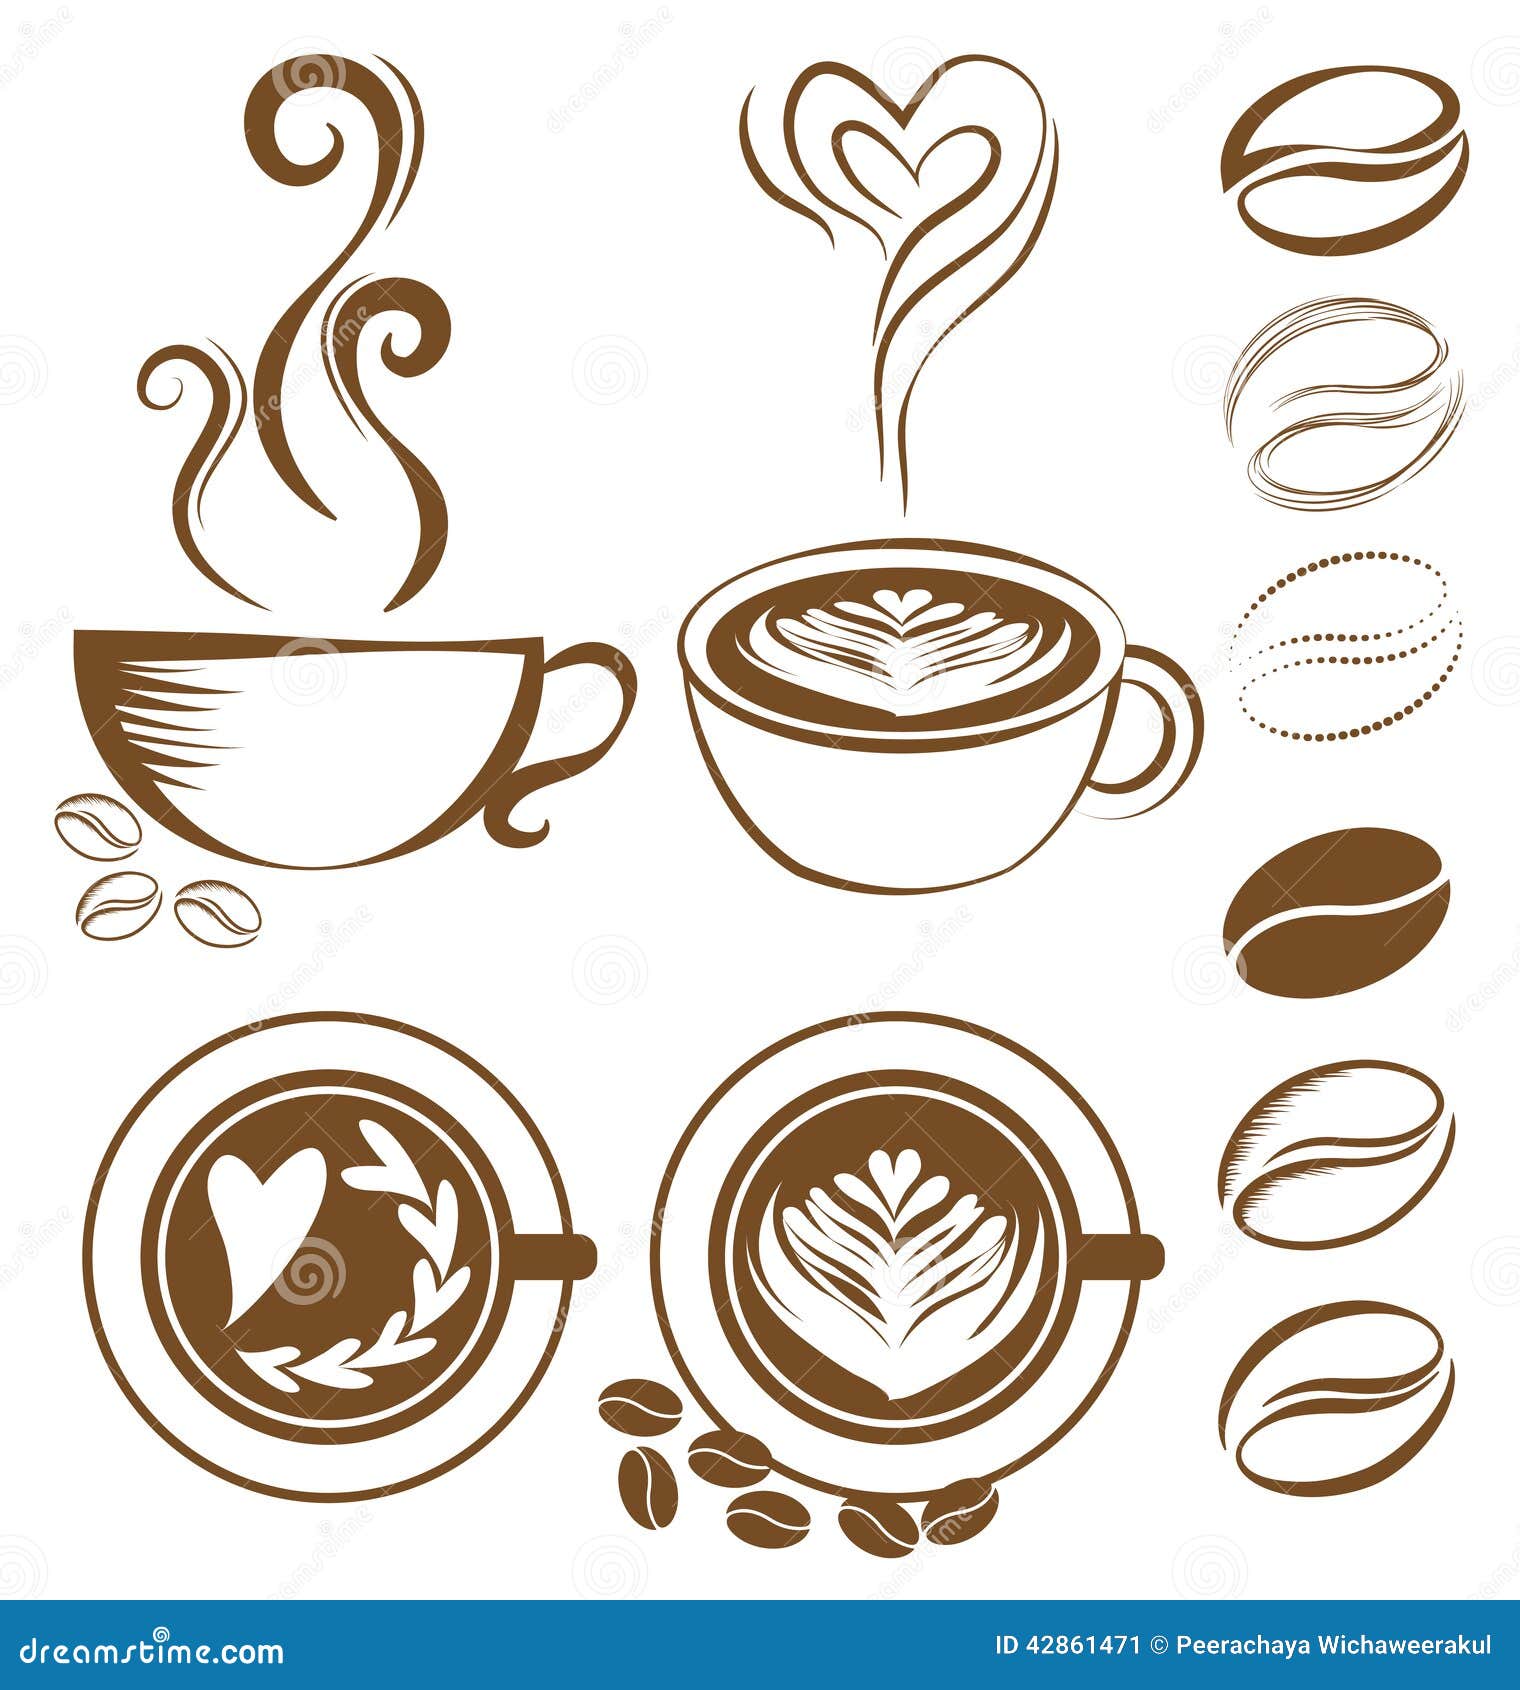 https://thumbs.dreamstime.com/z/coffee-cup-set-white-background-42861471.jpg